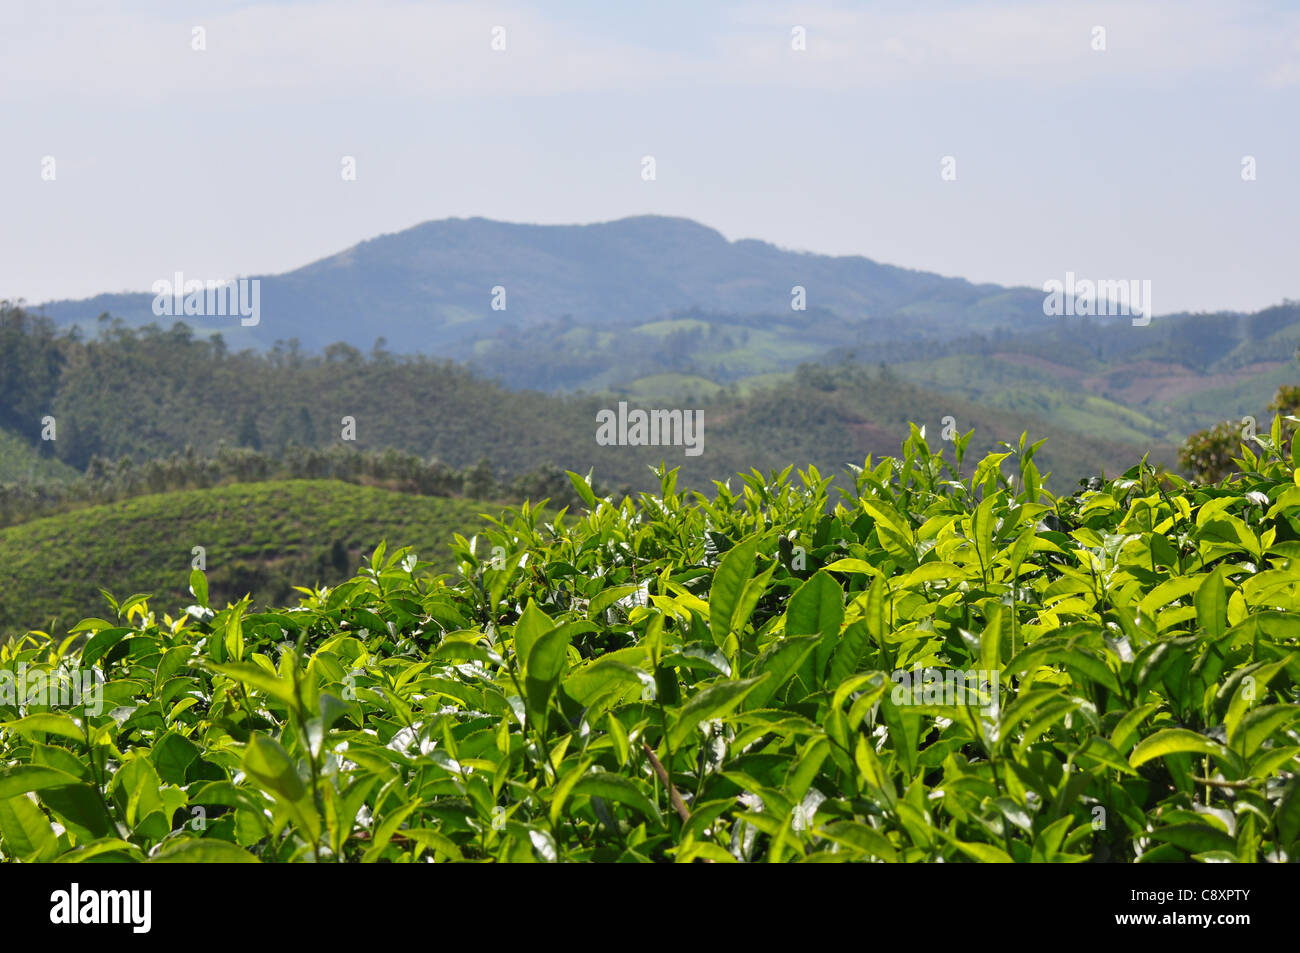 The blue mountains form a wonderful backdrop to tea plants in the fore ground Stock Photo